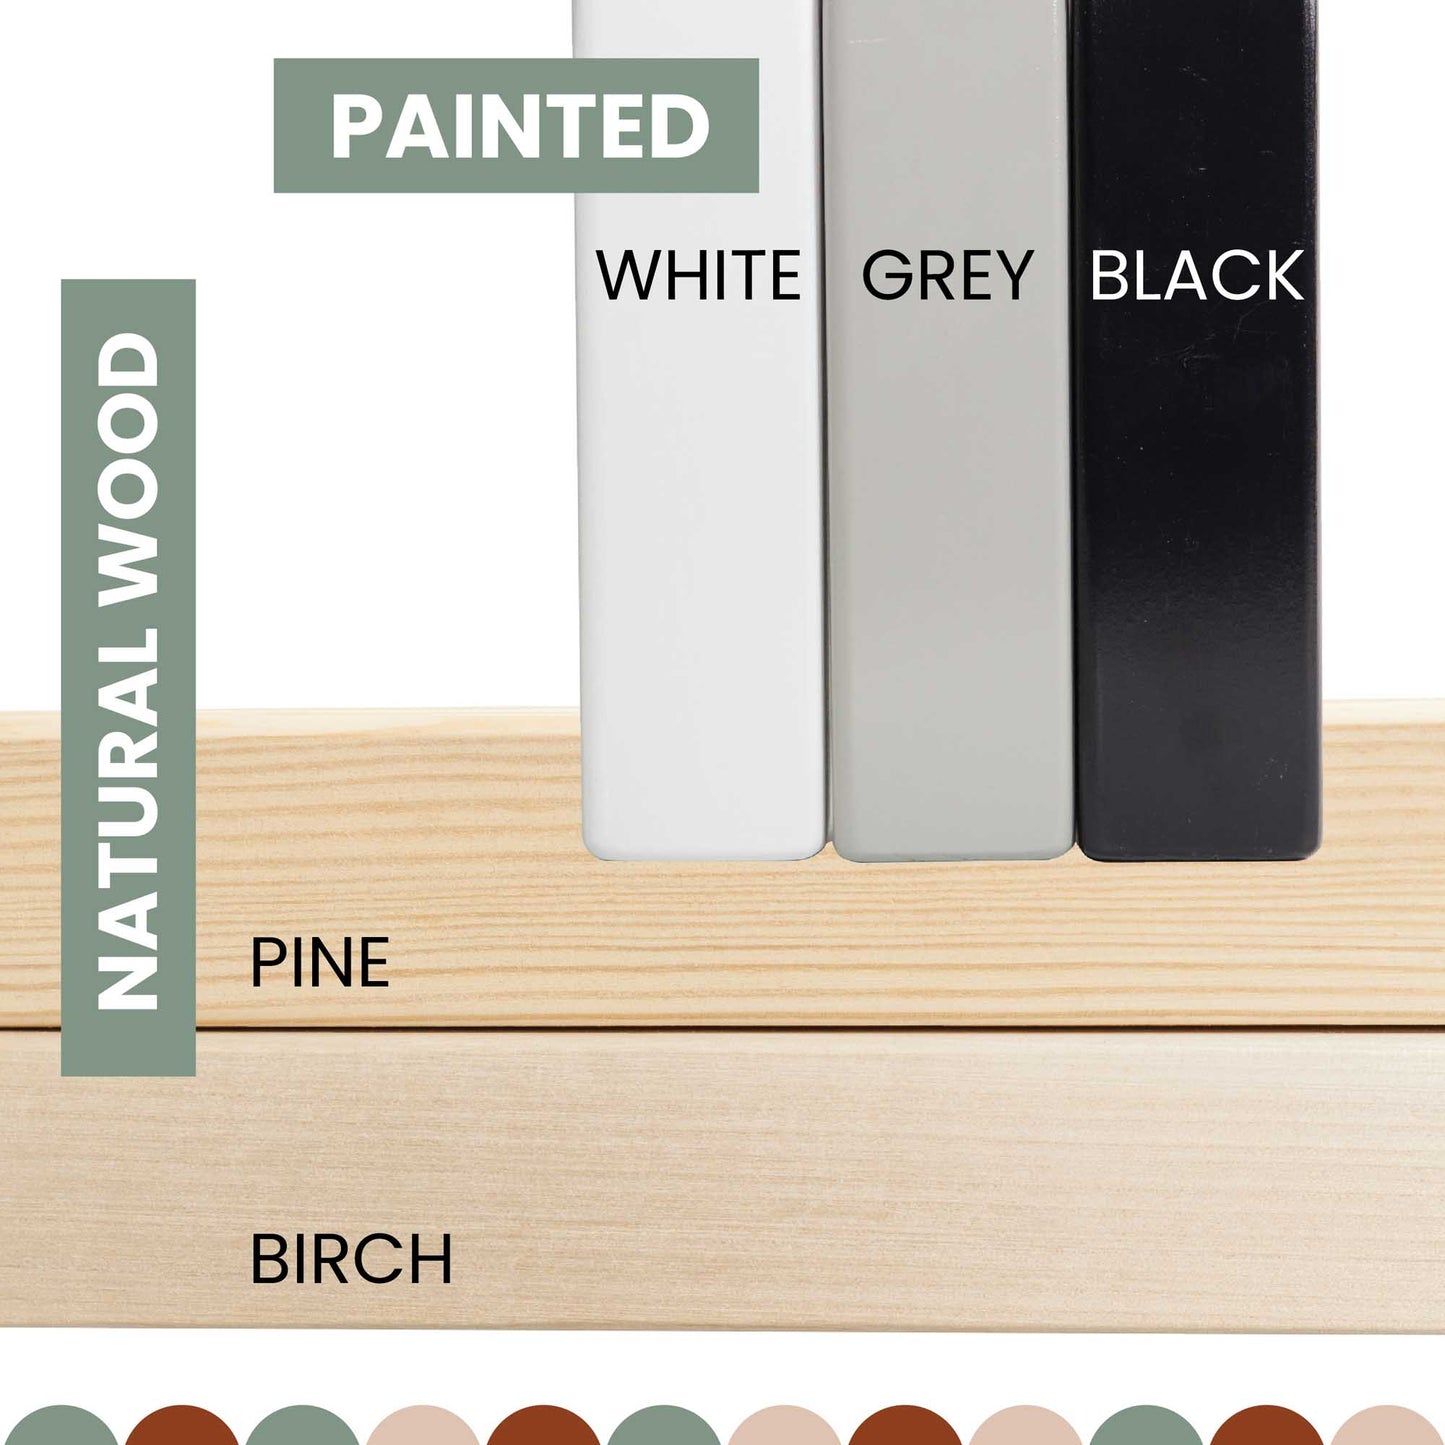 The paint colors for pine and birch on a Kids' house bed on legs with a headboard and footboard.